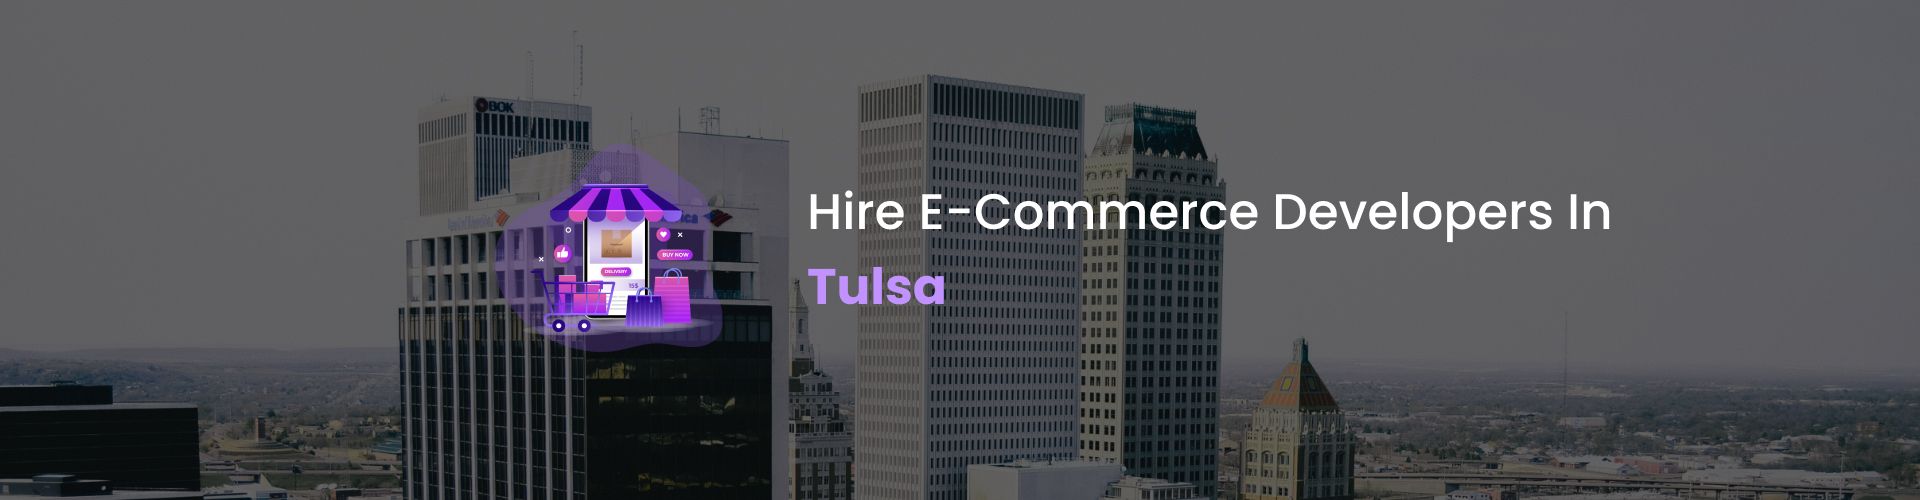 hire ecommerce developers in tulsa